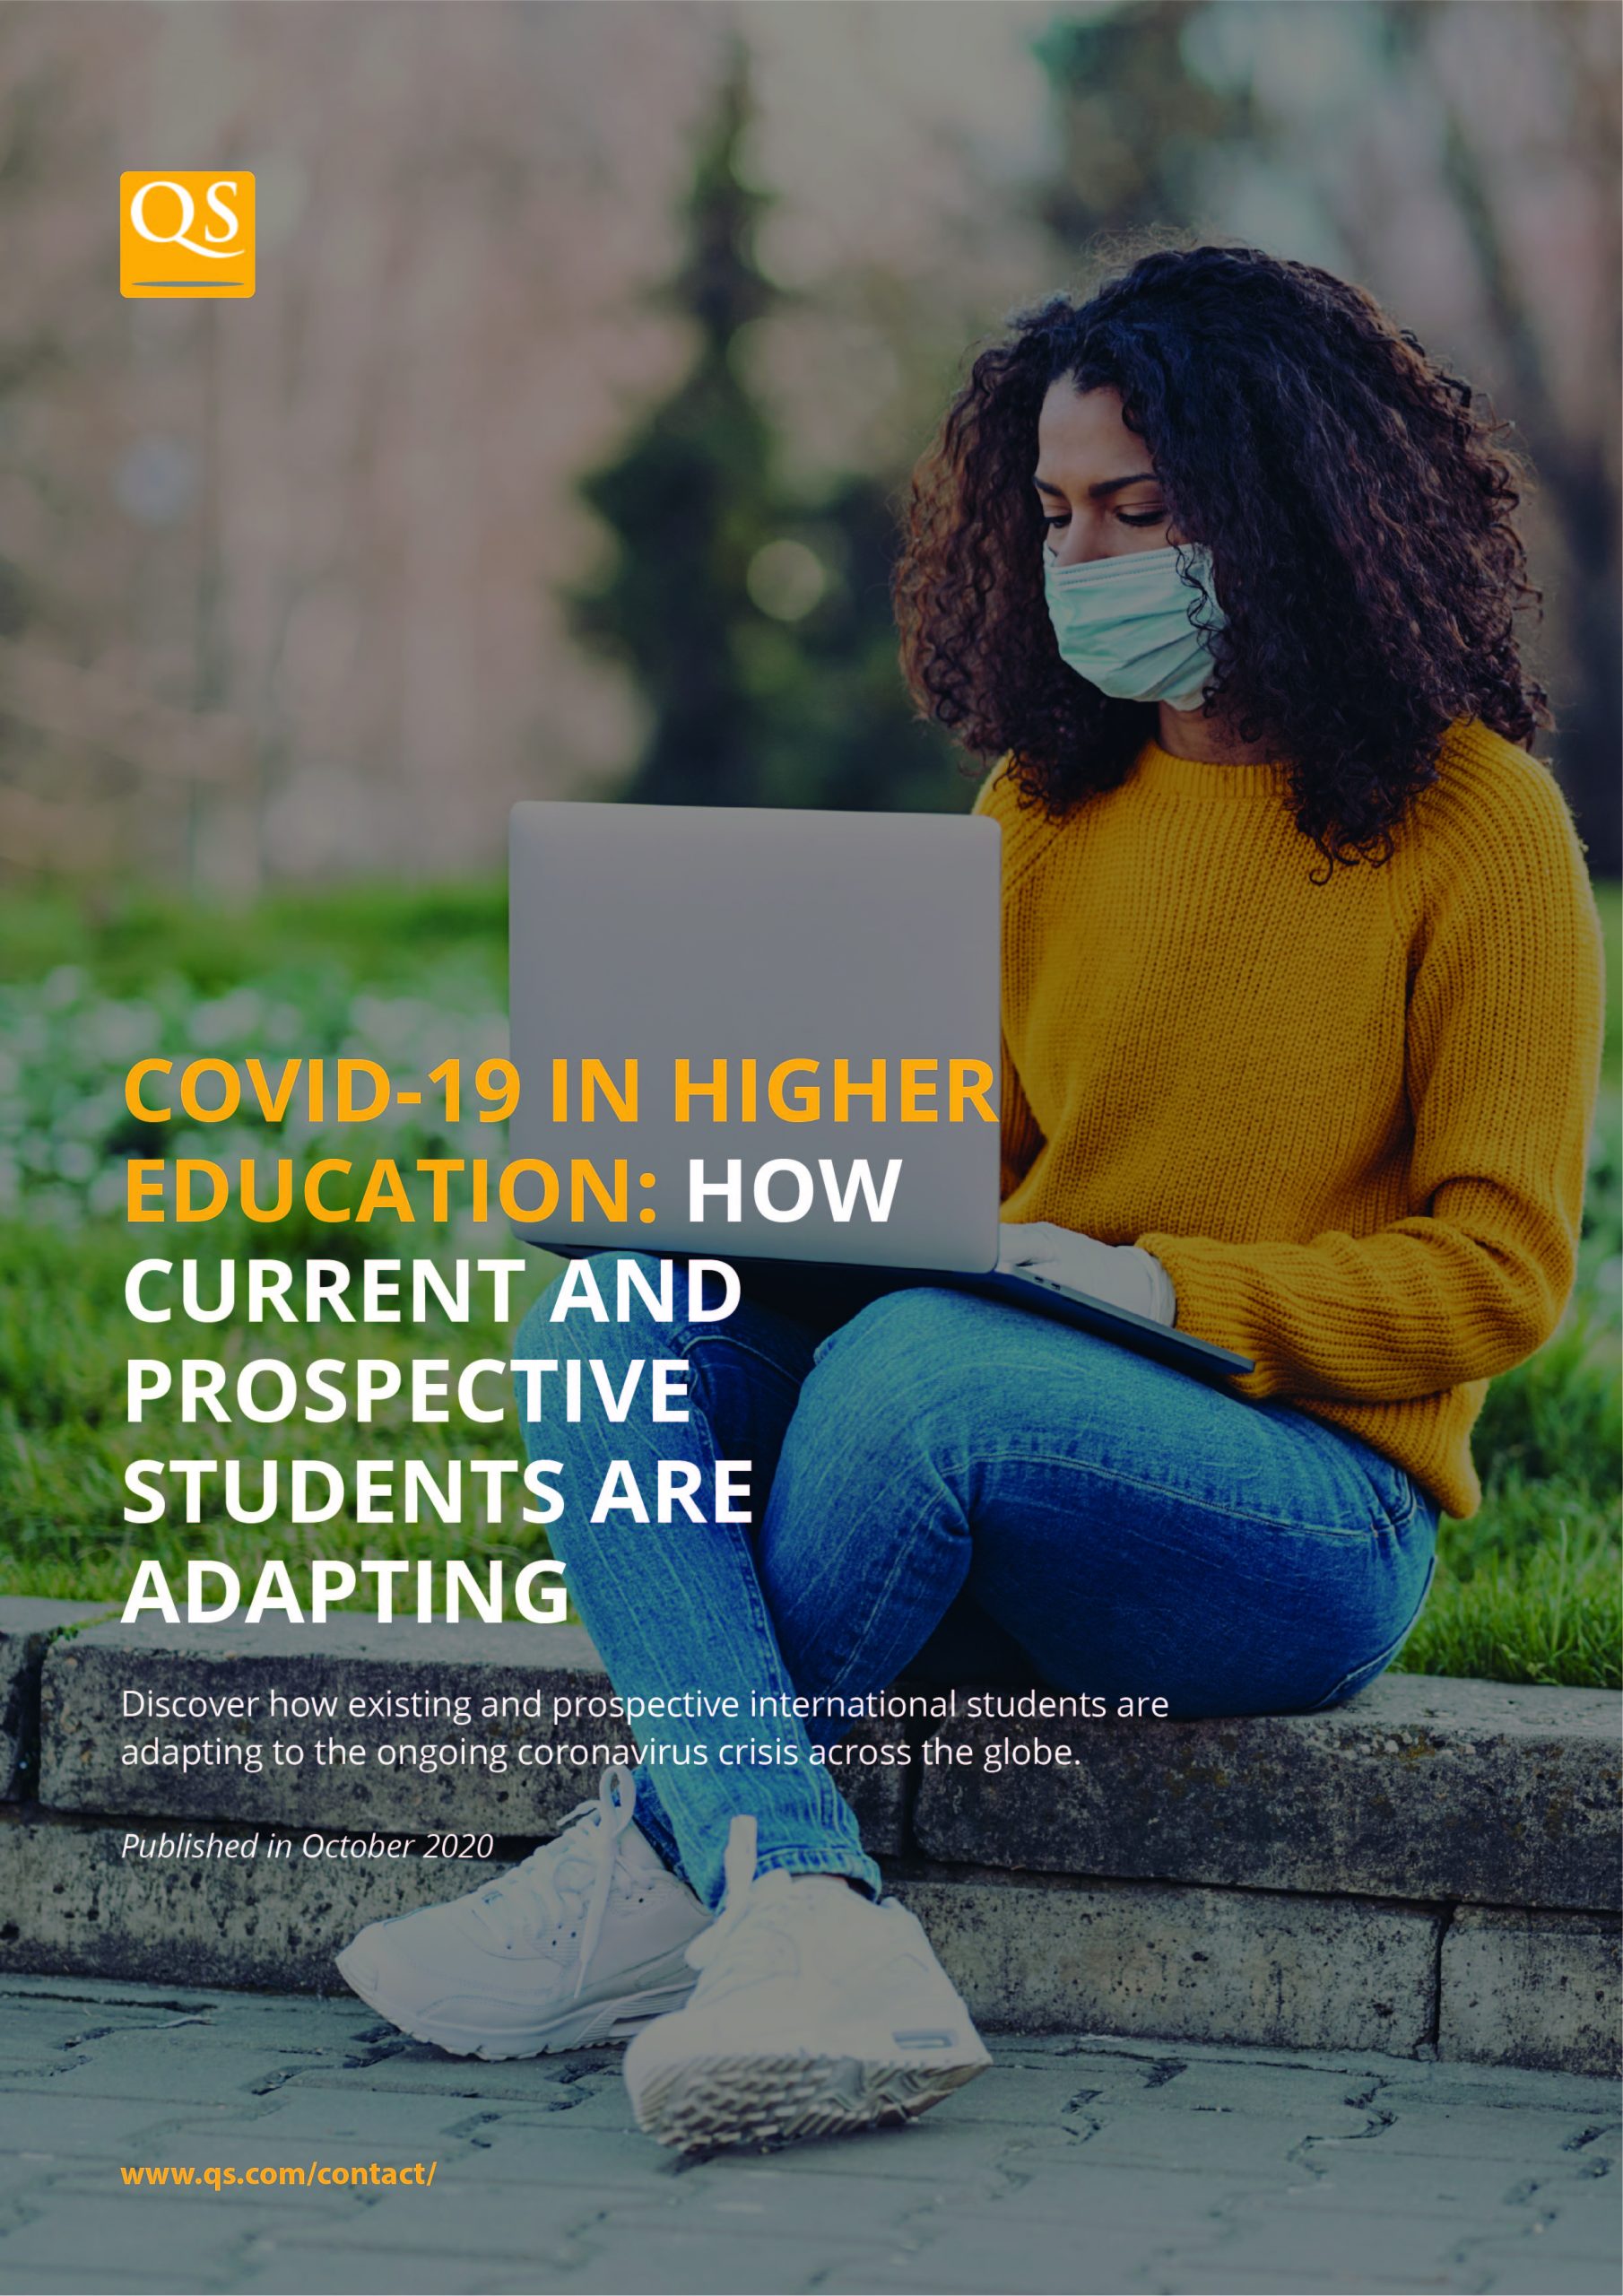 COVID-19-higher-education-how-current-prospective-students-adapting-report-Oct-2020